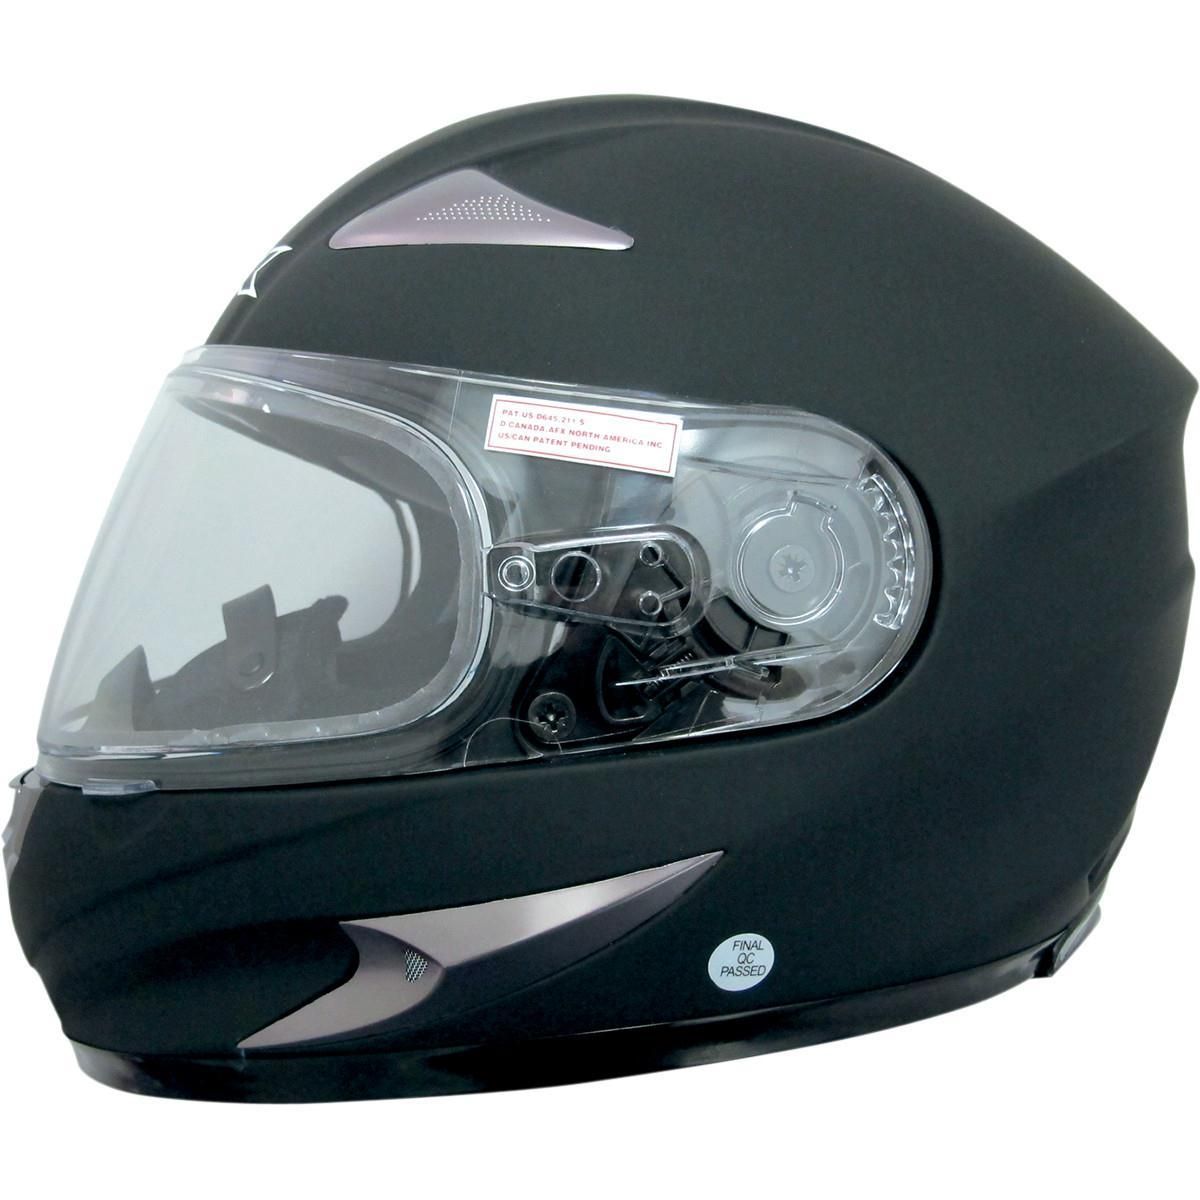 3L2-AFX-0121-0463 FX-90S Snow Solid Helmet with Dual Lens Shield